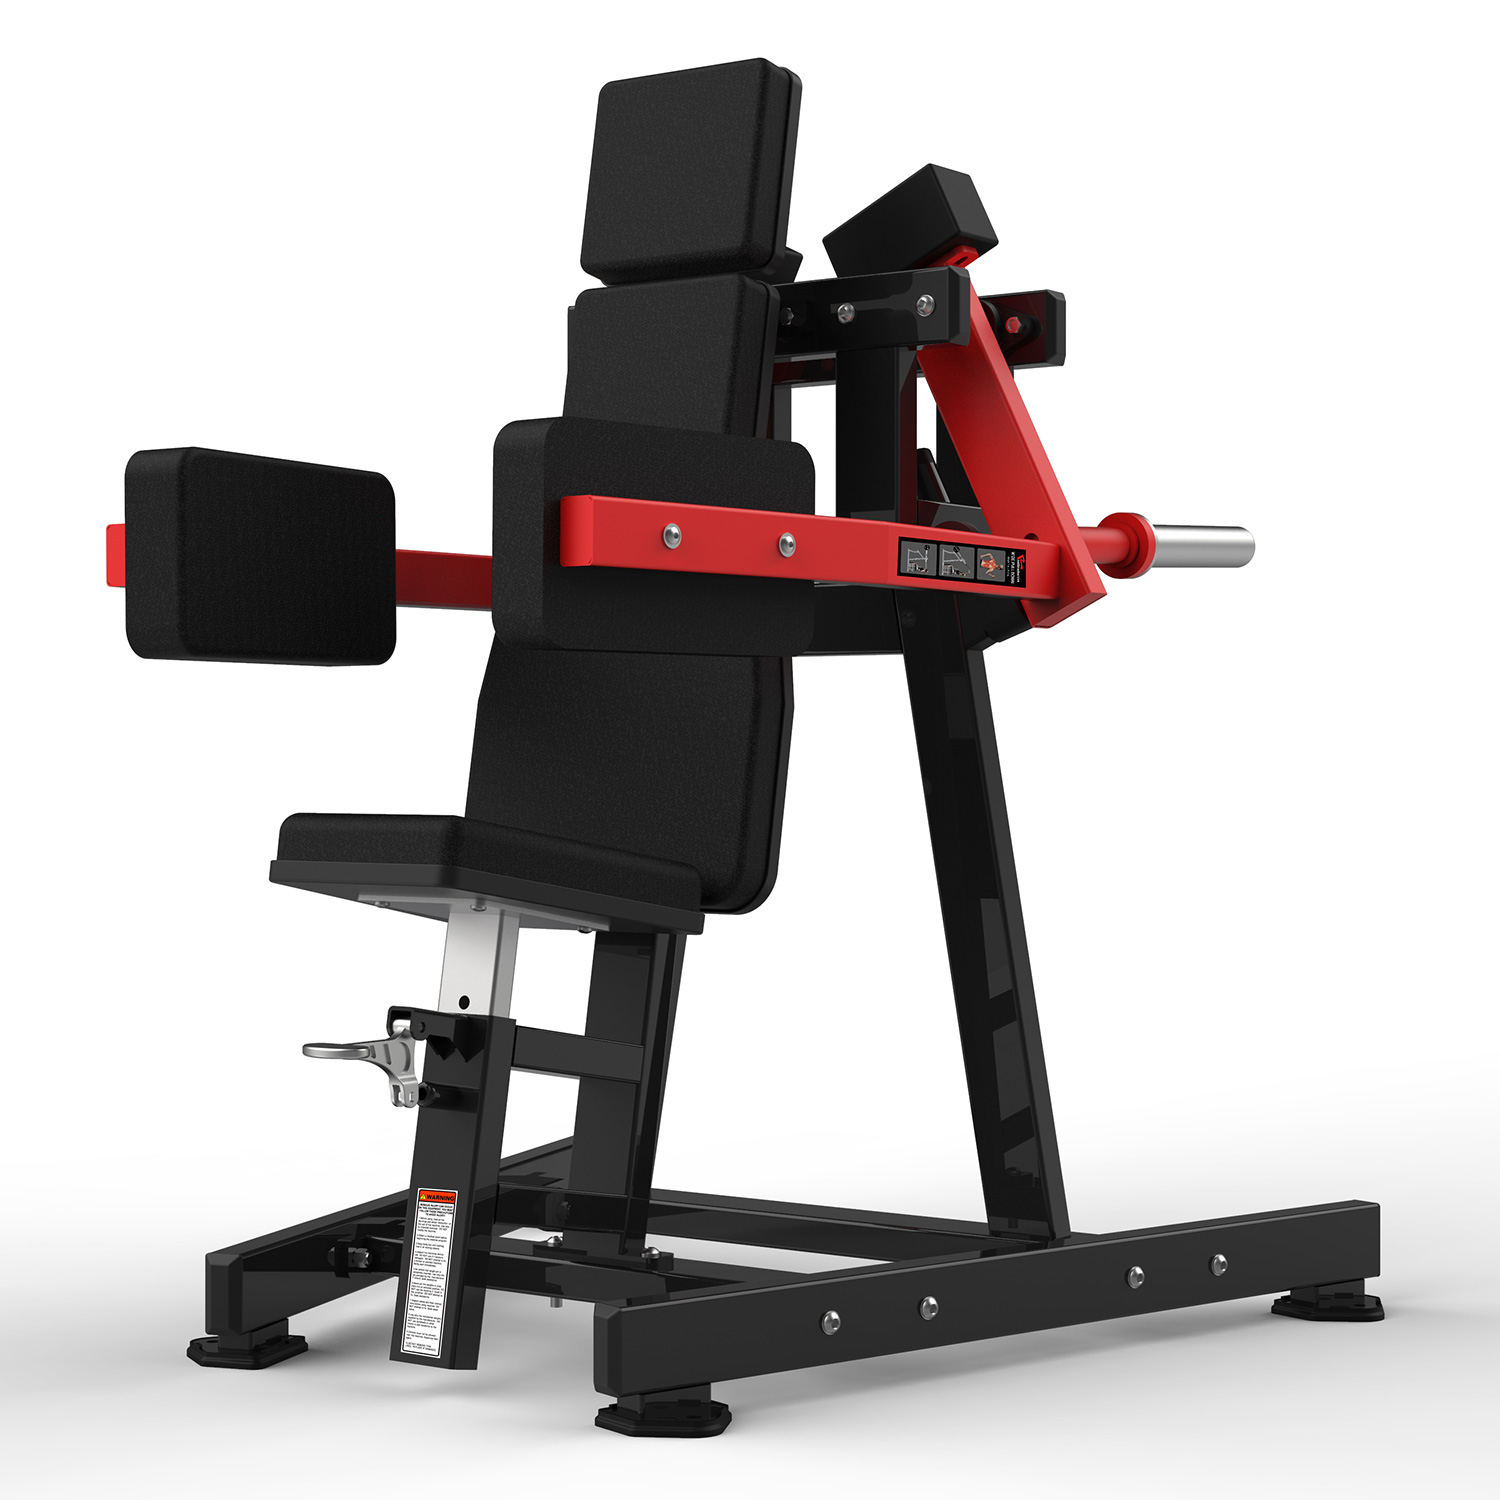 Body Exercise Machine RS-1016 Lateral Raise